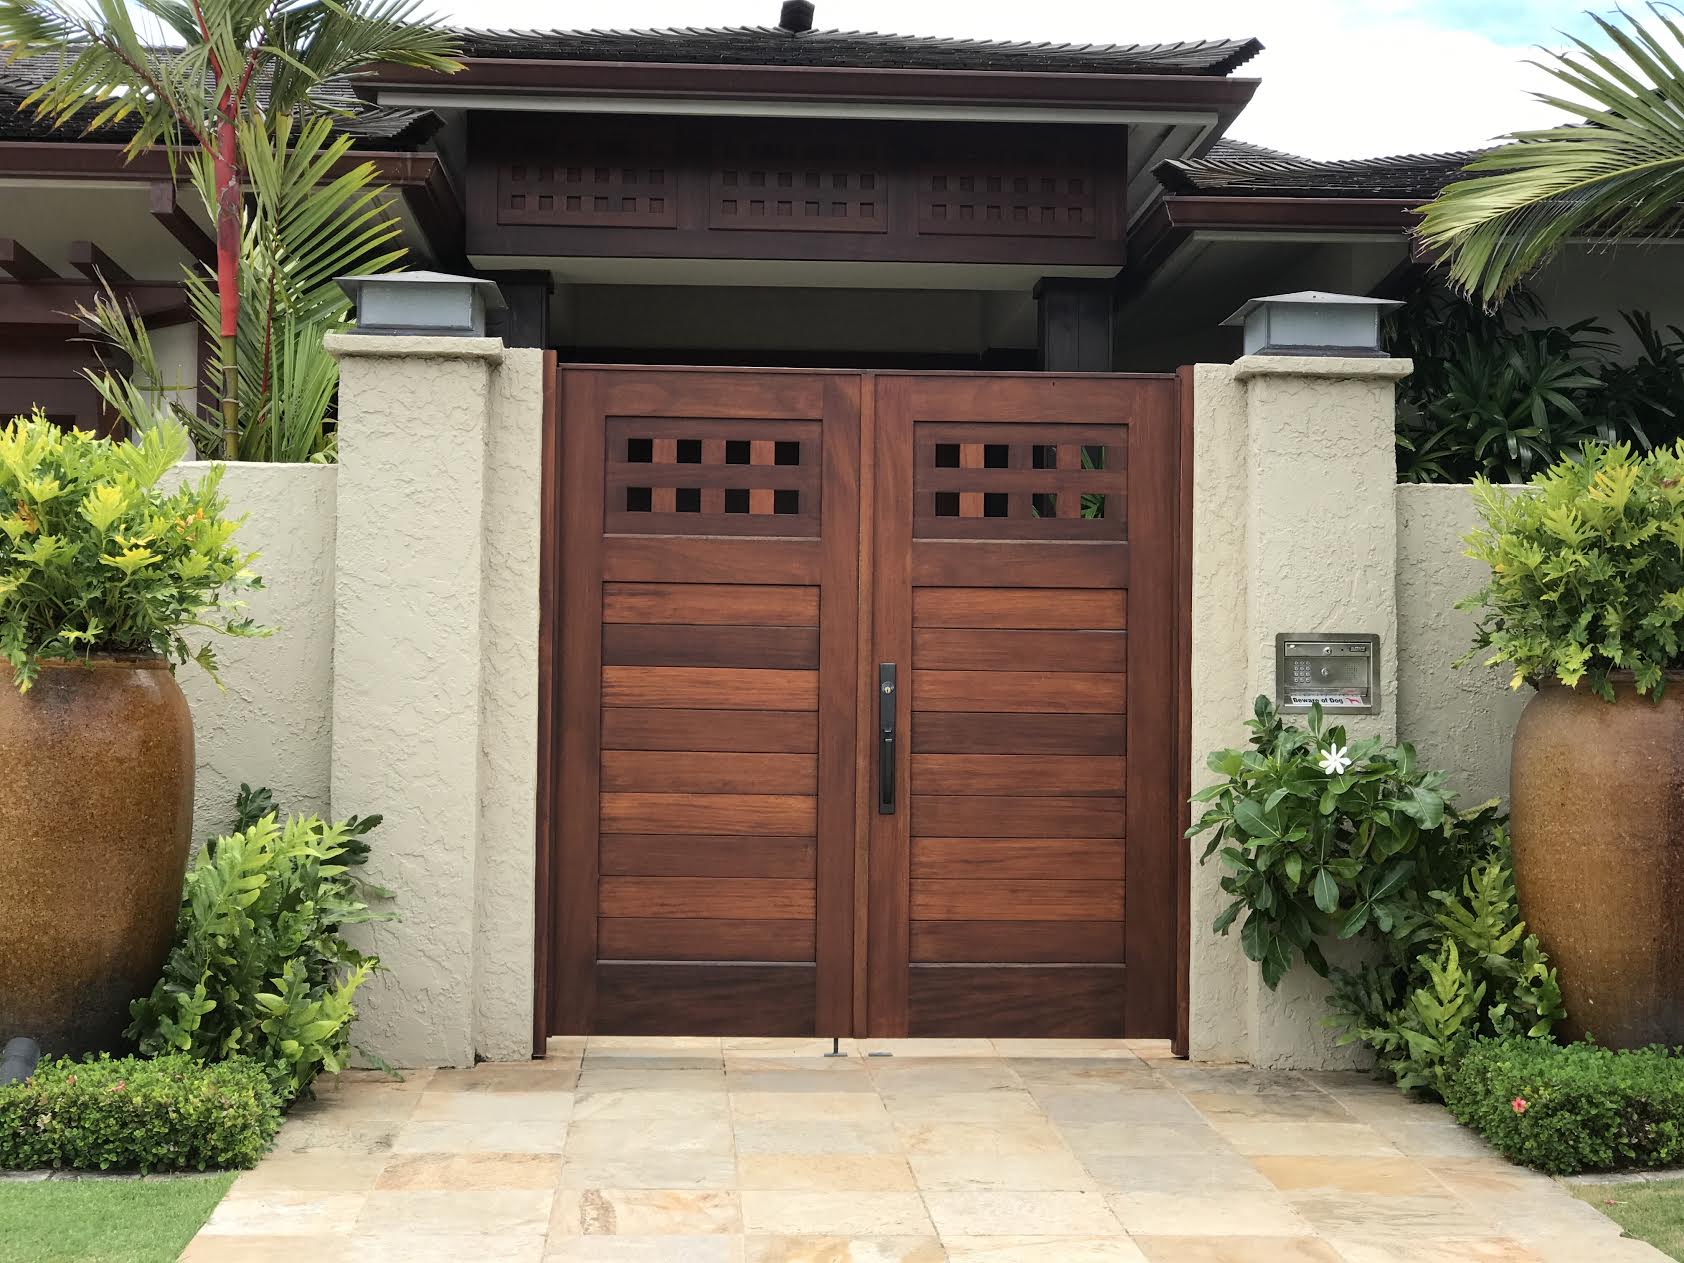 Entry Gate to Home